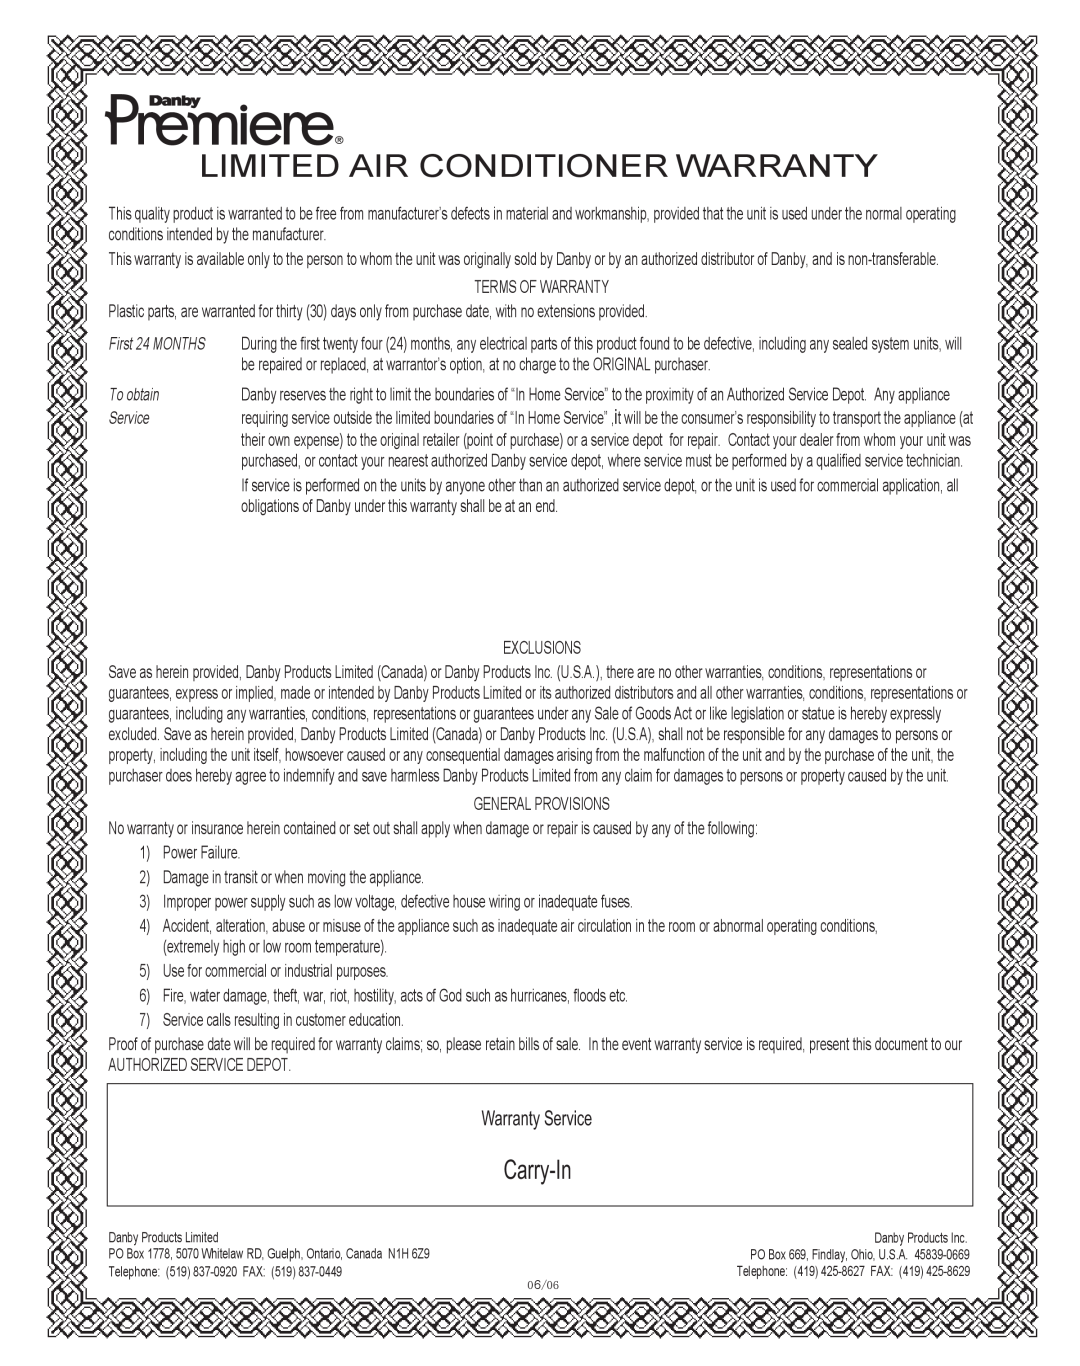 Danby DAC6078EE manual Limited Air Conditioner Warranty, First 24 MONTHS, To obtain, Service 